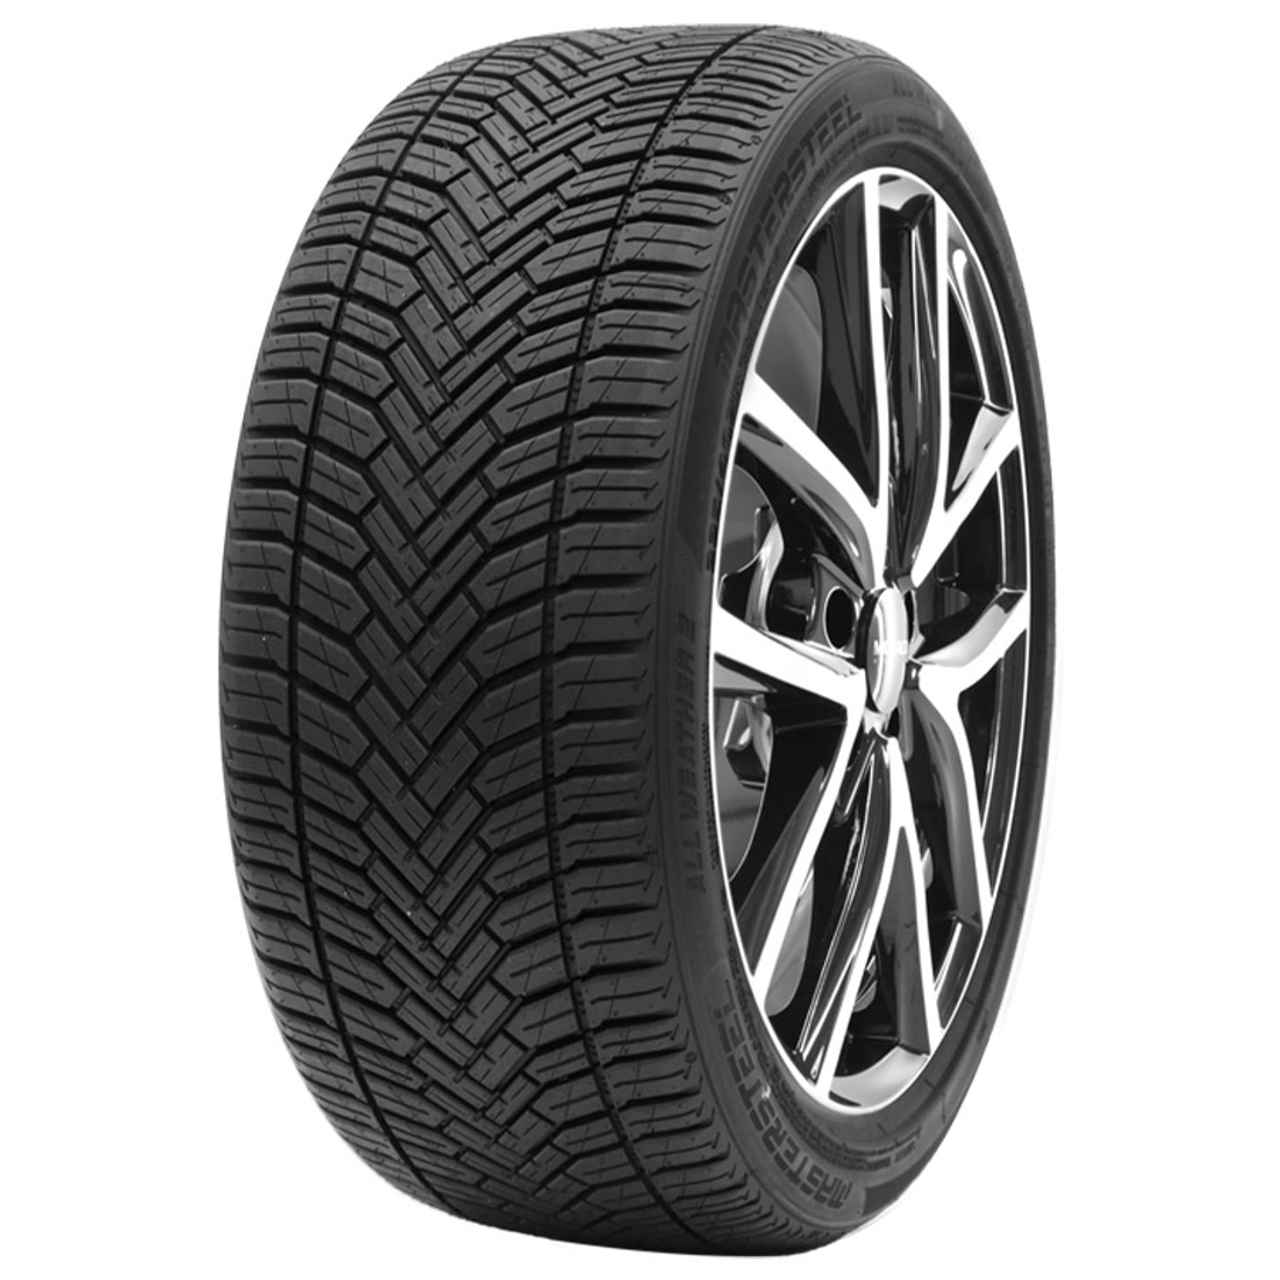 MASTERSTEEL ALL WEATHER 2 225/65R17 106V BSW